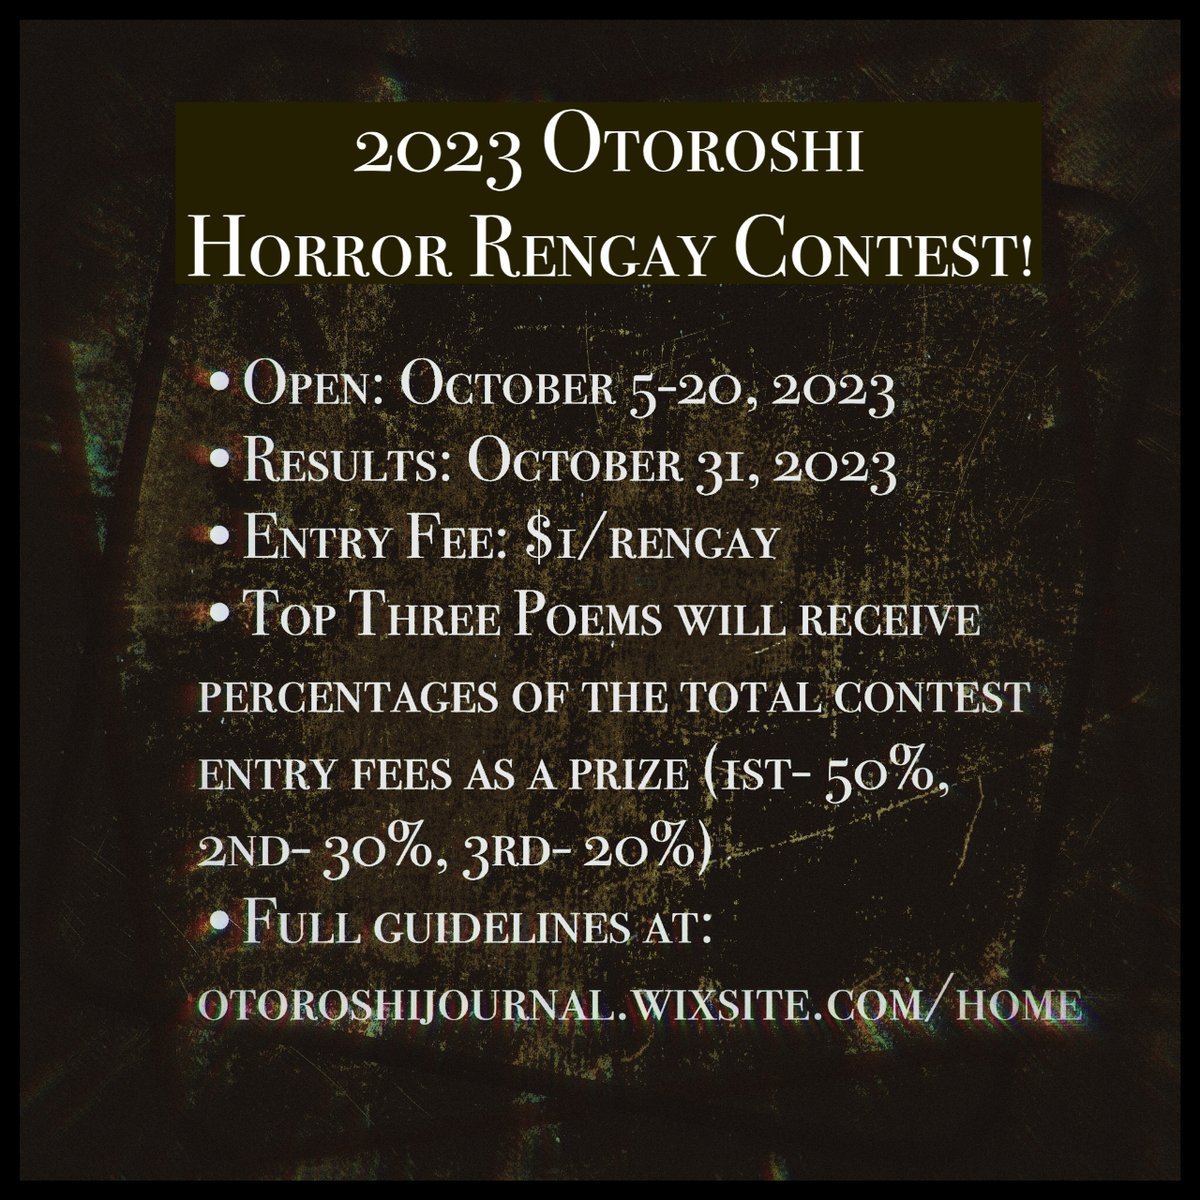 #LASTDAY! OUR #horror #rengay #poetrycontest is CLOSING TODAY!!! 

#Scare Us! #Terrify Us! Give us #Nightmares! 
But do it #today!

#poetrycompetition #writers #writingcommunity #quote #competition #writing #writingcontest #poems #writingcompetition #contestalert #terror #scary